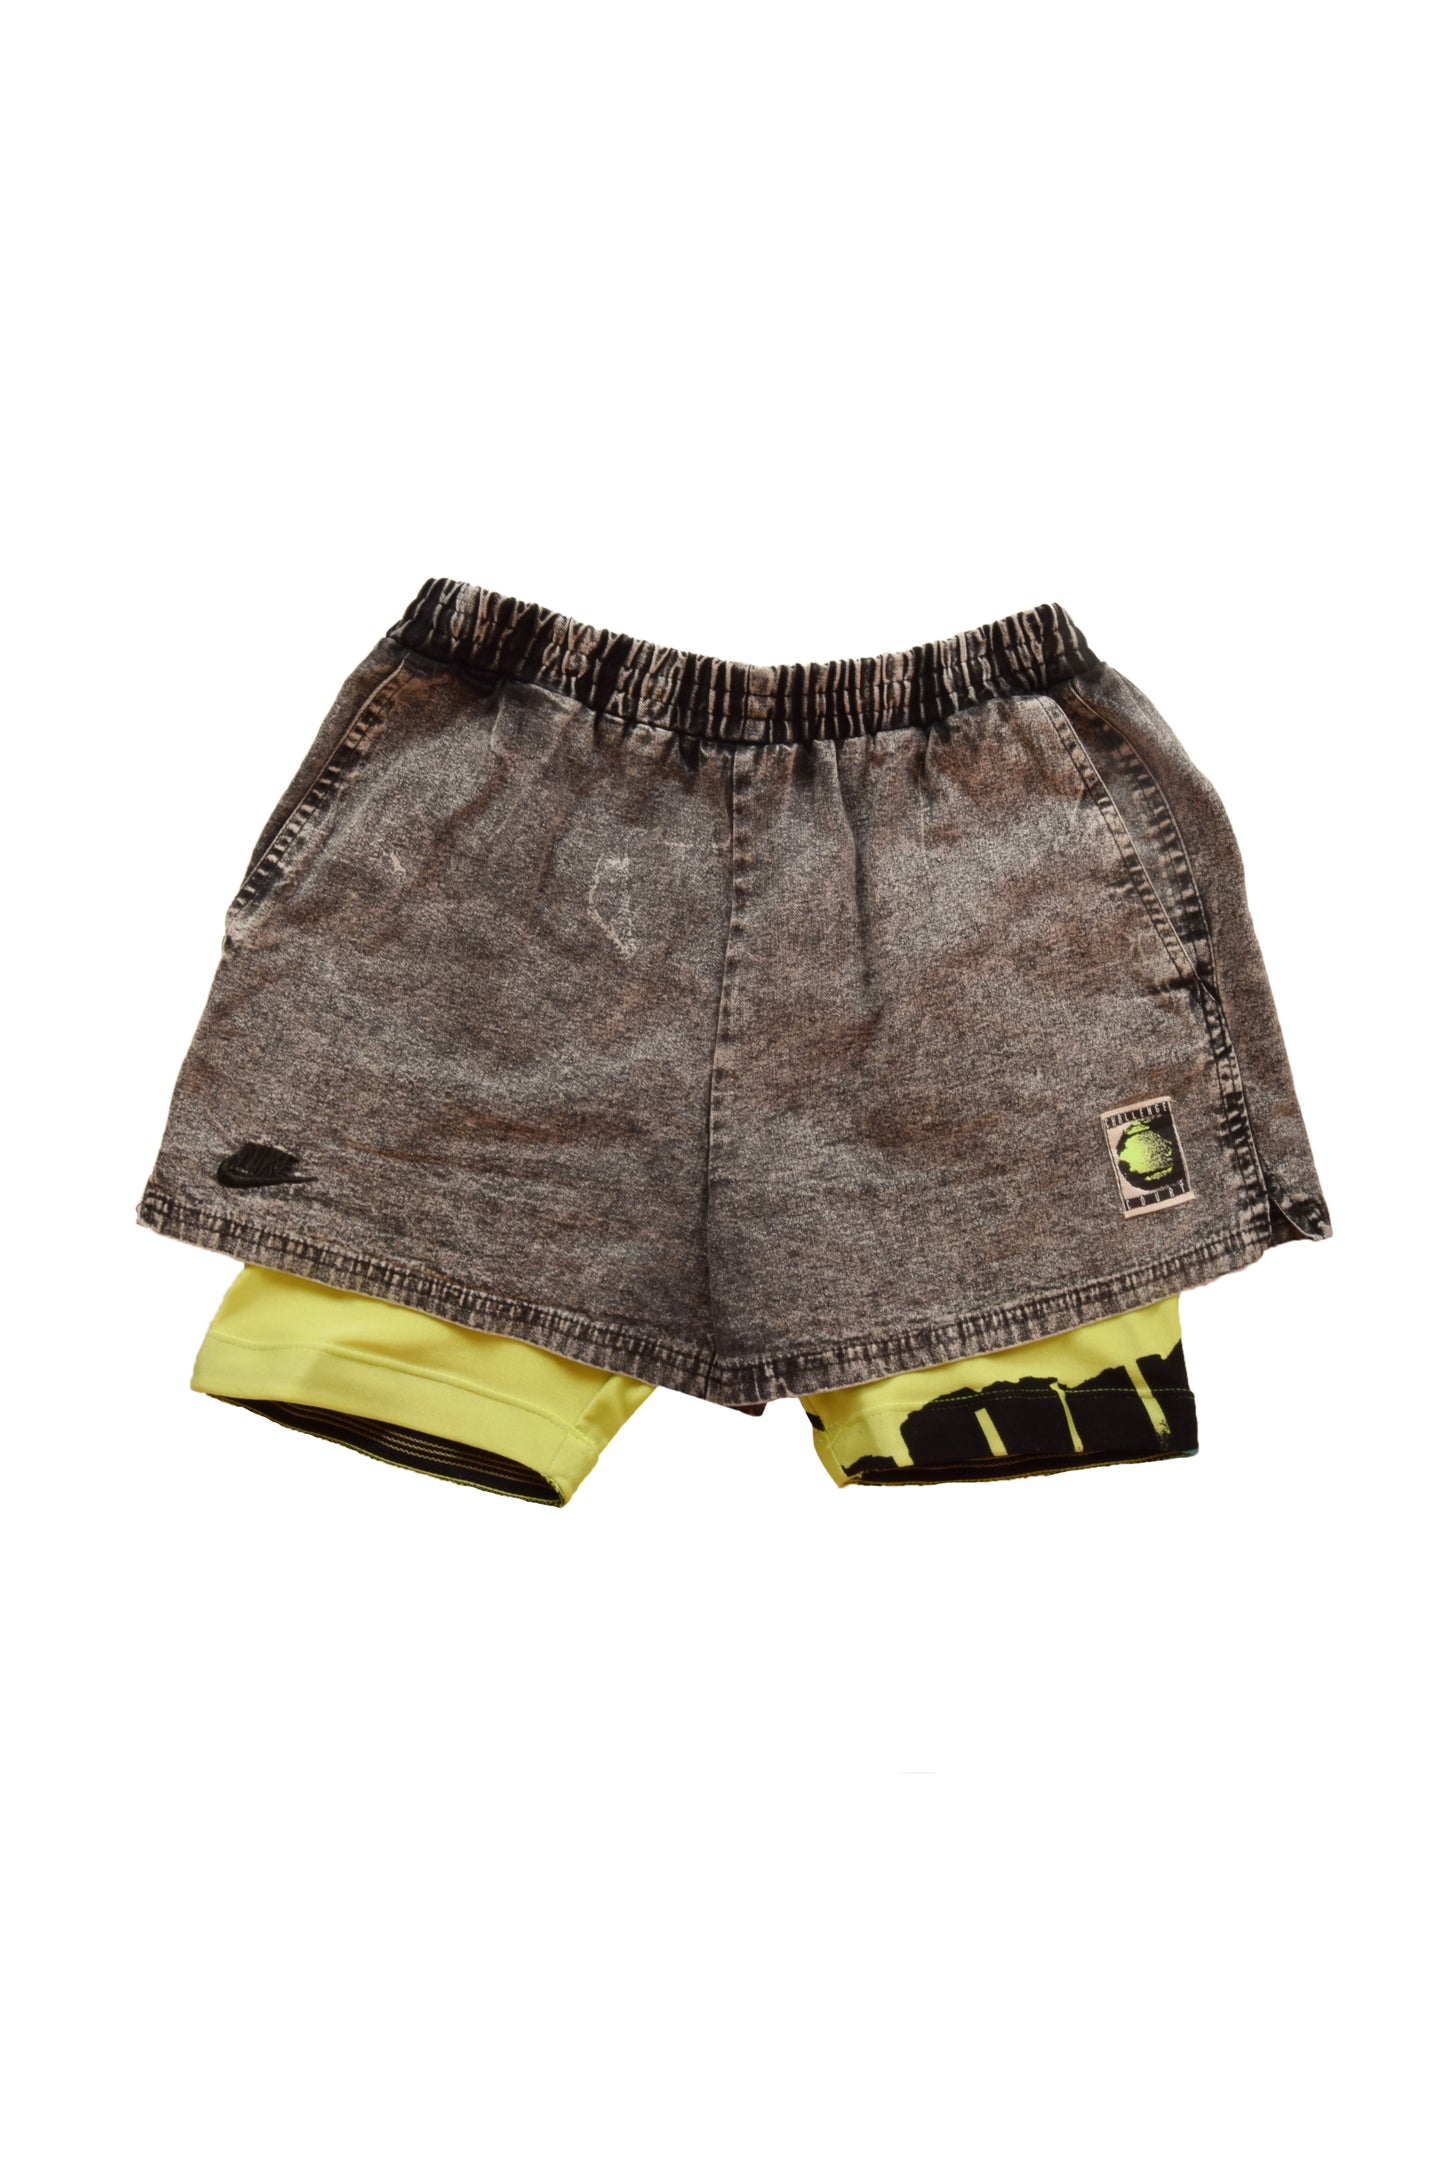 Nike Challenge Court Shorts Acid Washed With Leggins Attached Andre Agassi